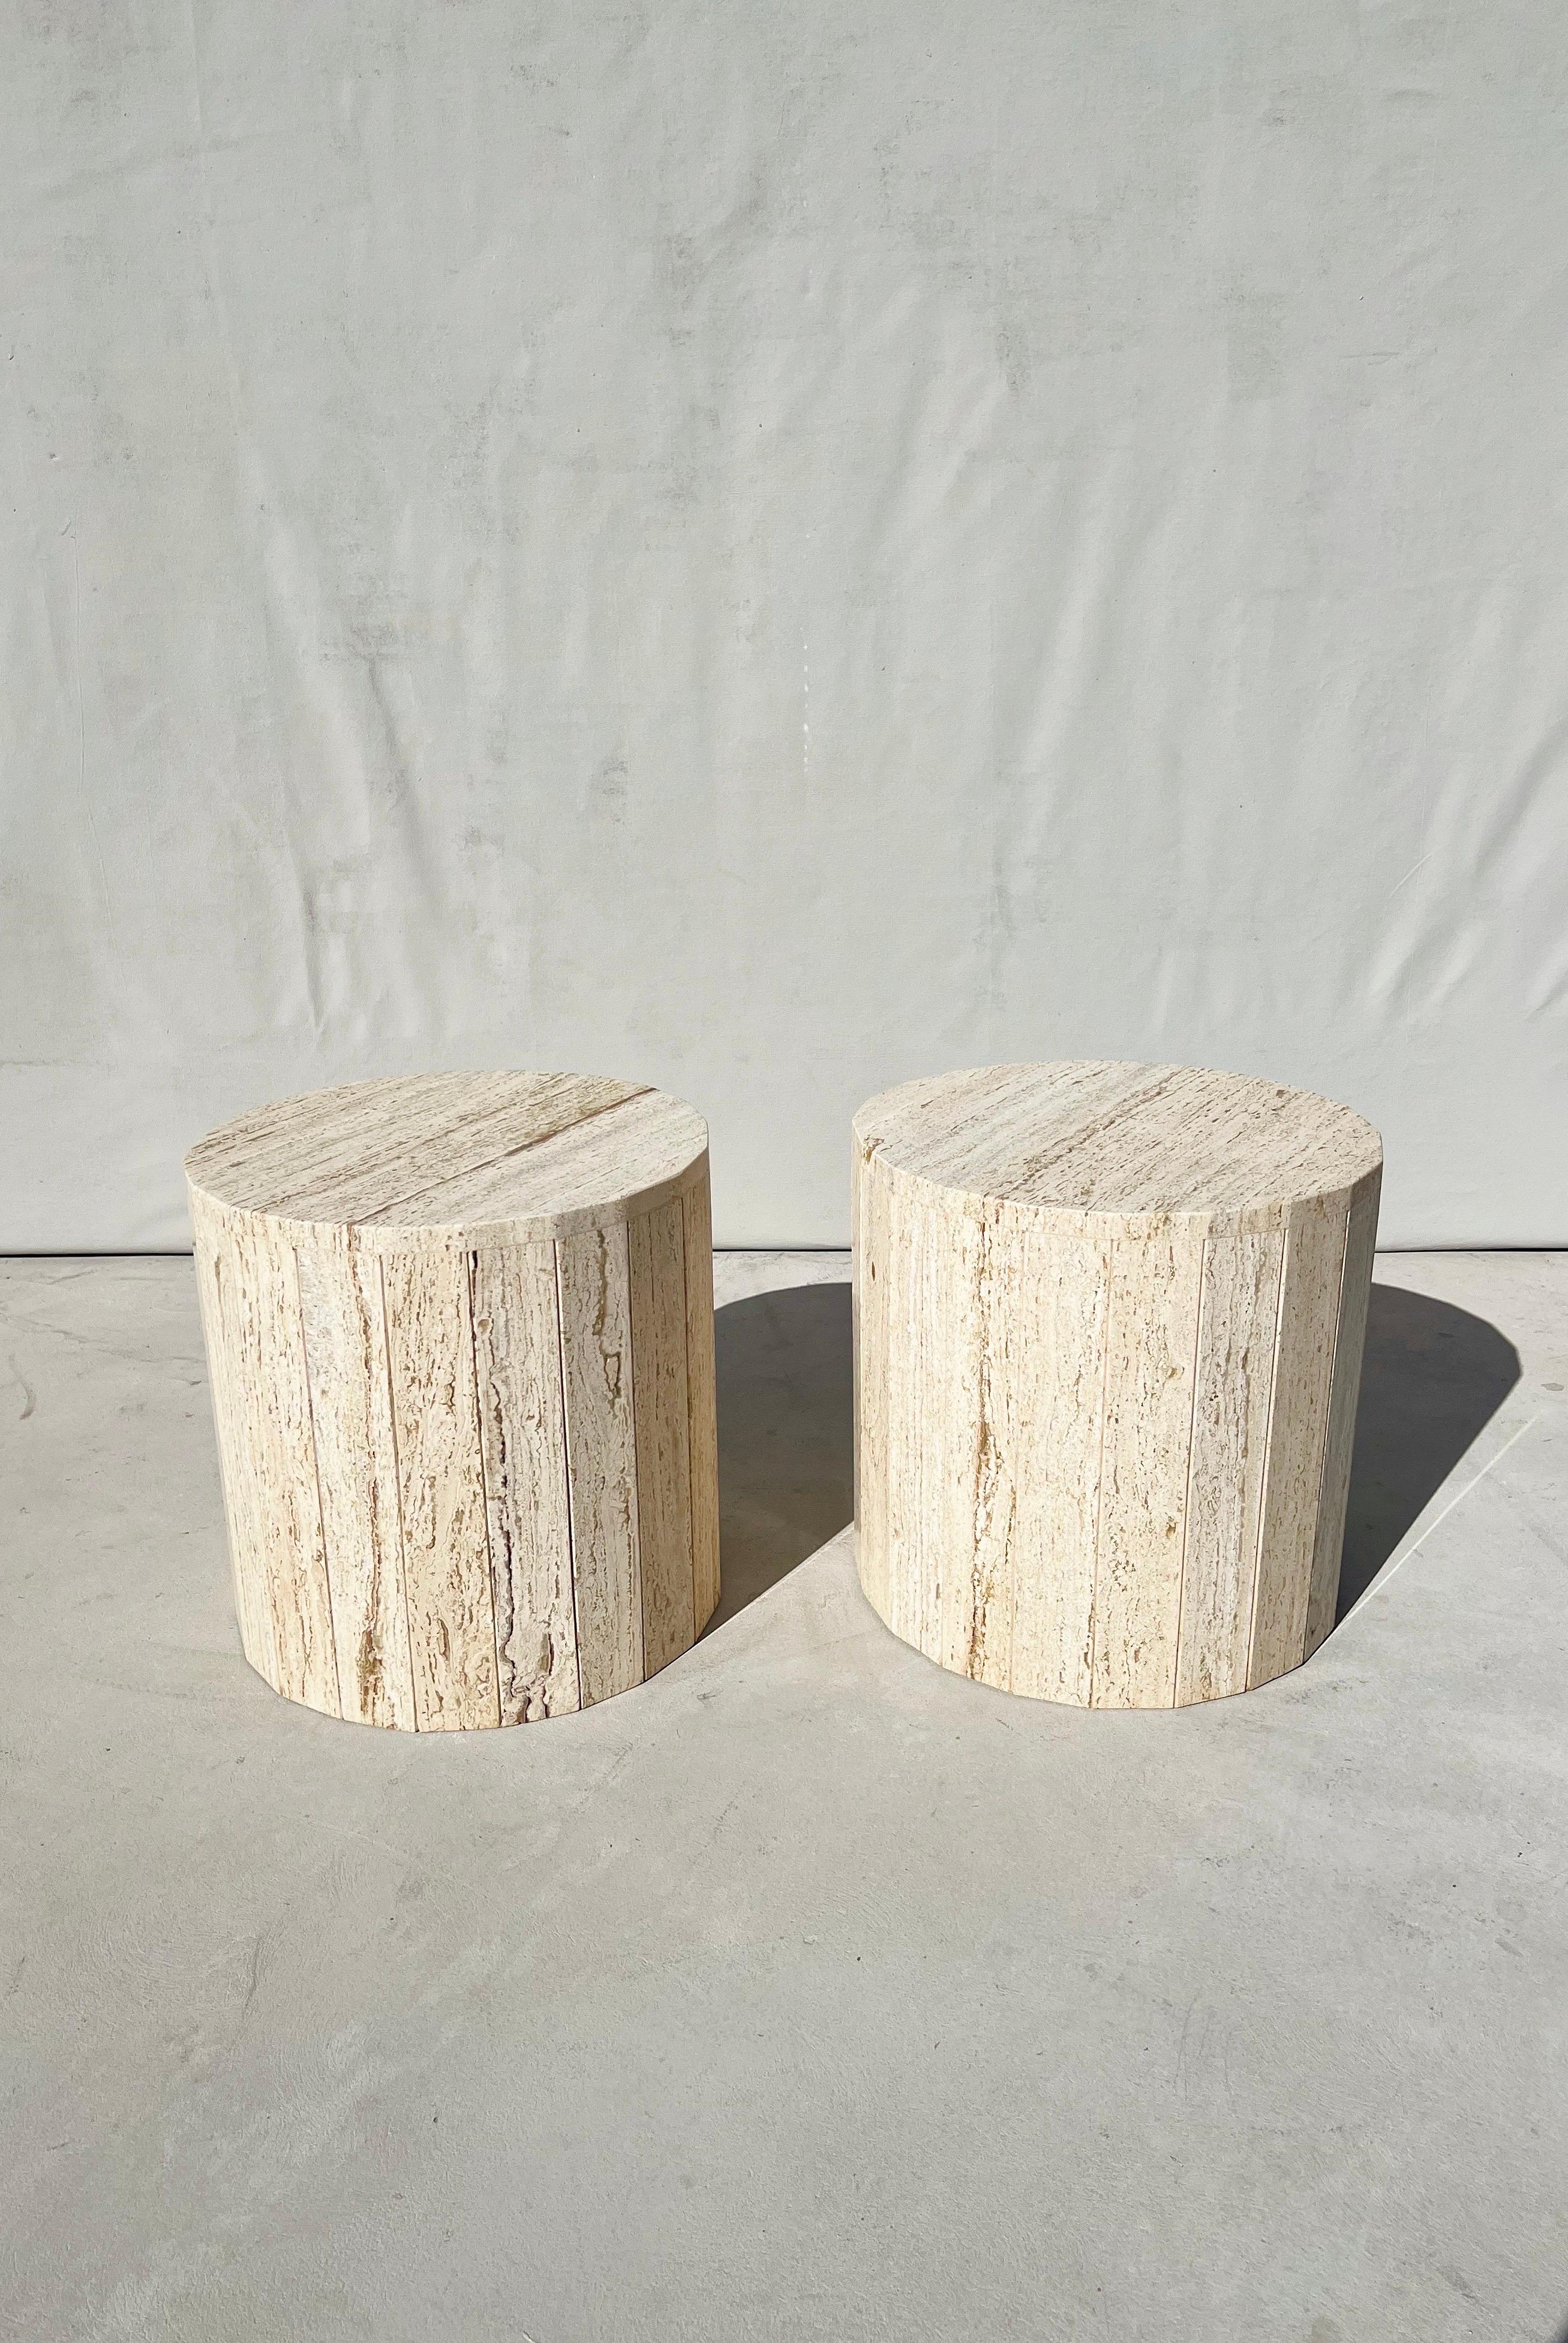 Vintage pair of fluted italian travertine drum tables/ side tables /coffee tables /pedestals.

The perfect pair of travertine tables. Exhibiting an array of dreamy travertine colors such as creamy beige, eggshell, almond and striking accents of